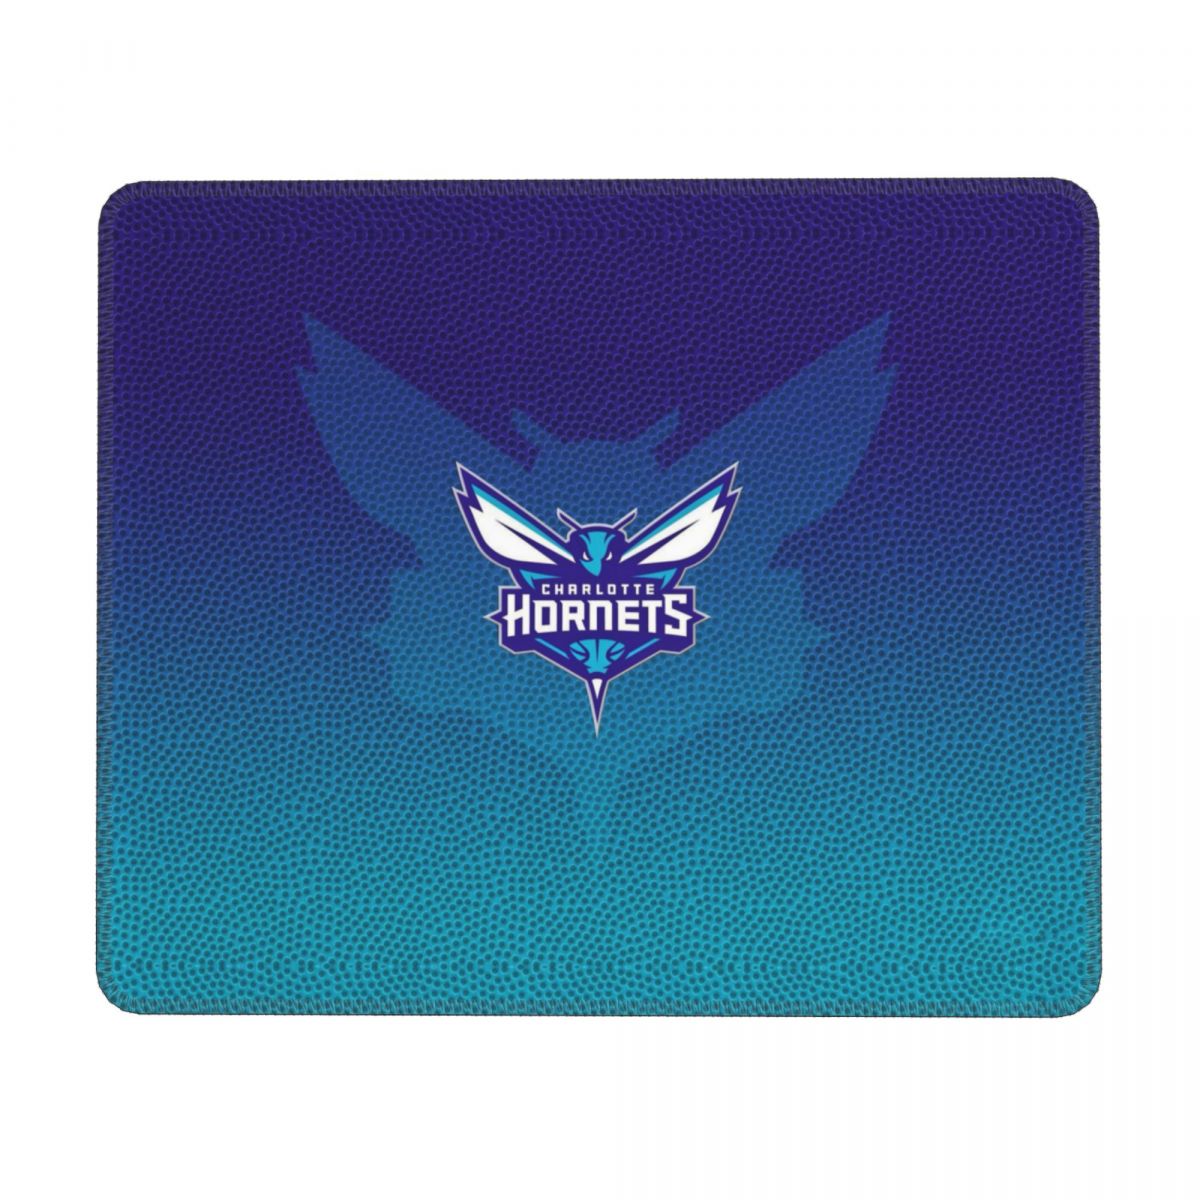 Charlotte Hornets Gradient Teal Square Gaming Mouse Pad with Stitched Edge